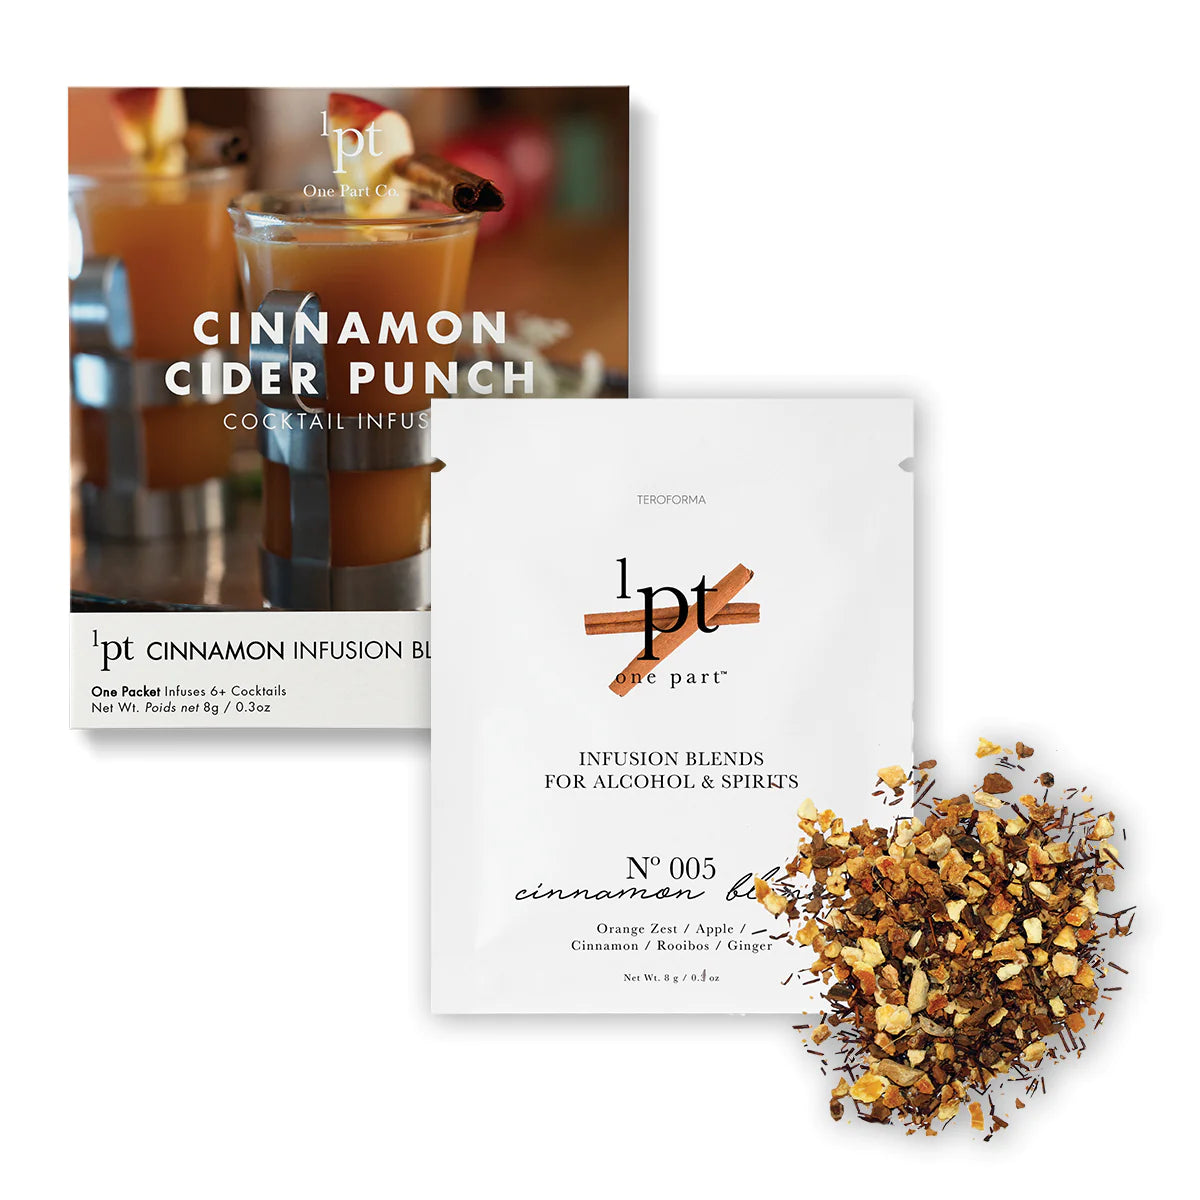 Cinnamon Cider Punch Cocktail Infusion Kit